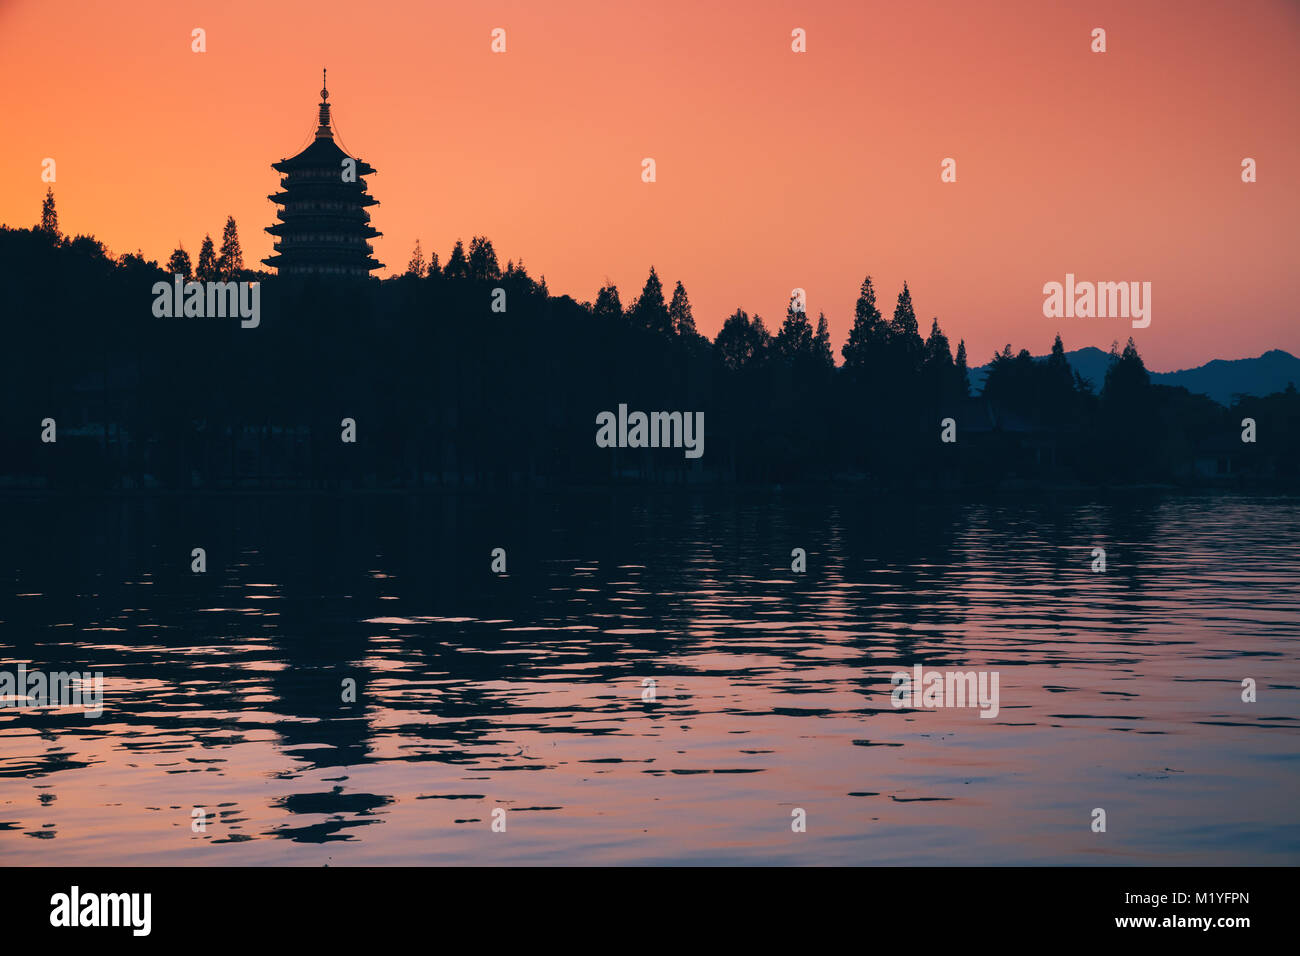 Chinese landscape at sunset, silhouette of ancient pagoda over bright evening sky background. Coast of West Lake. Famous public park in Hangzhou city, Stock Photo